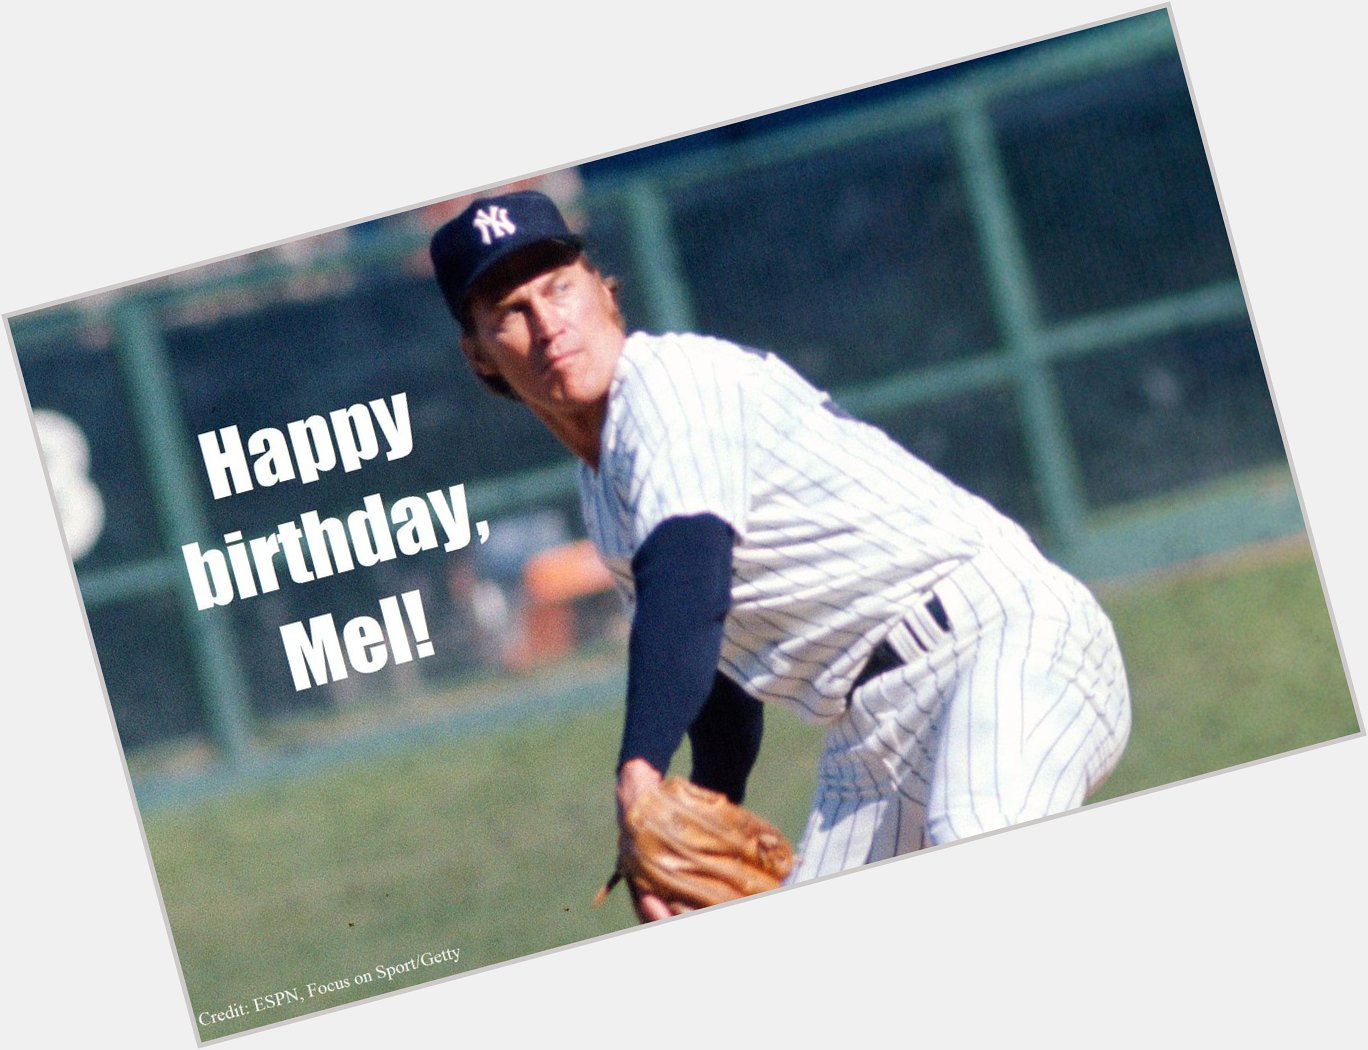 Former ace and 90s dynasty pitching coach Mel Stottlemyre turns 73 today--Happy birthday, Mel! 